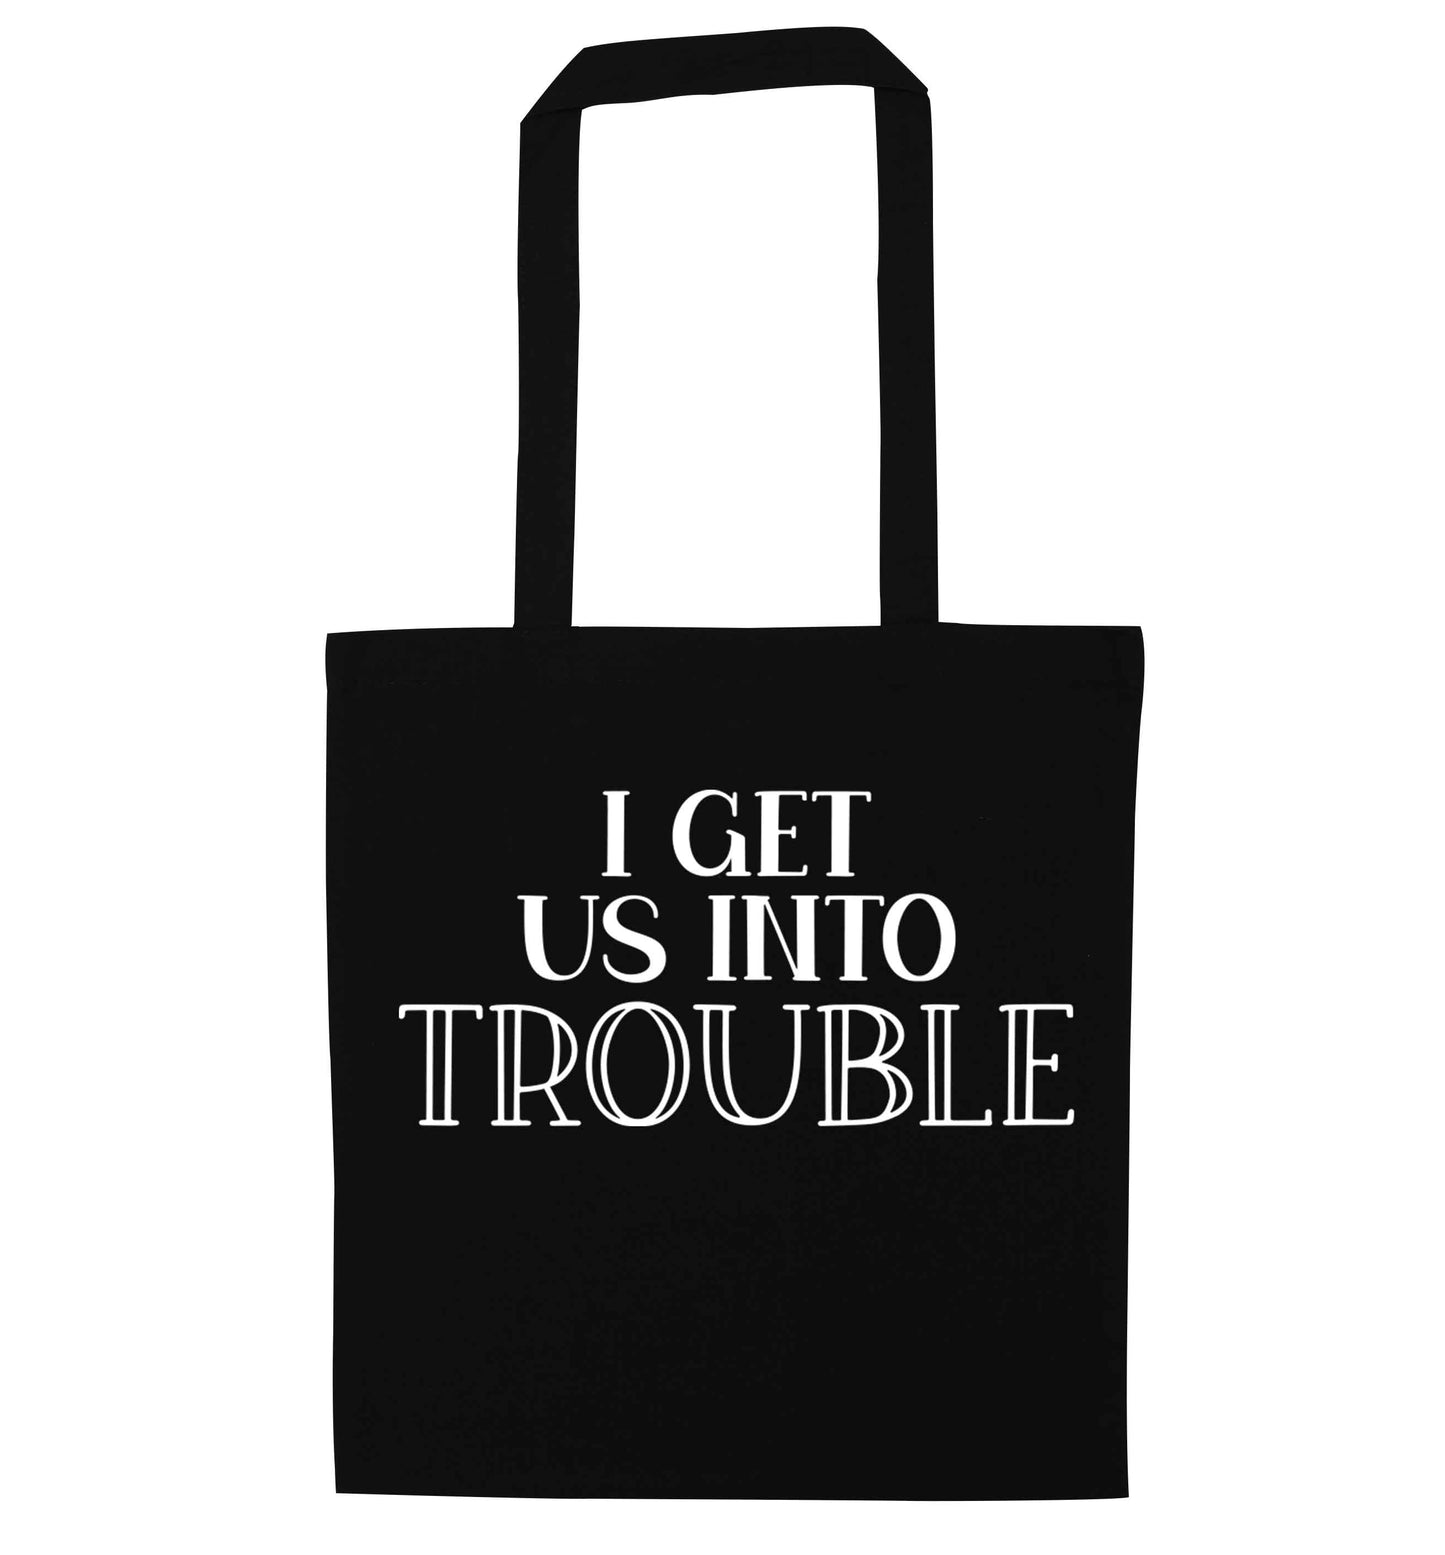 I get us into trouble black tote bag